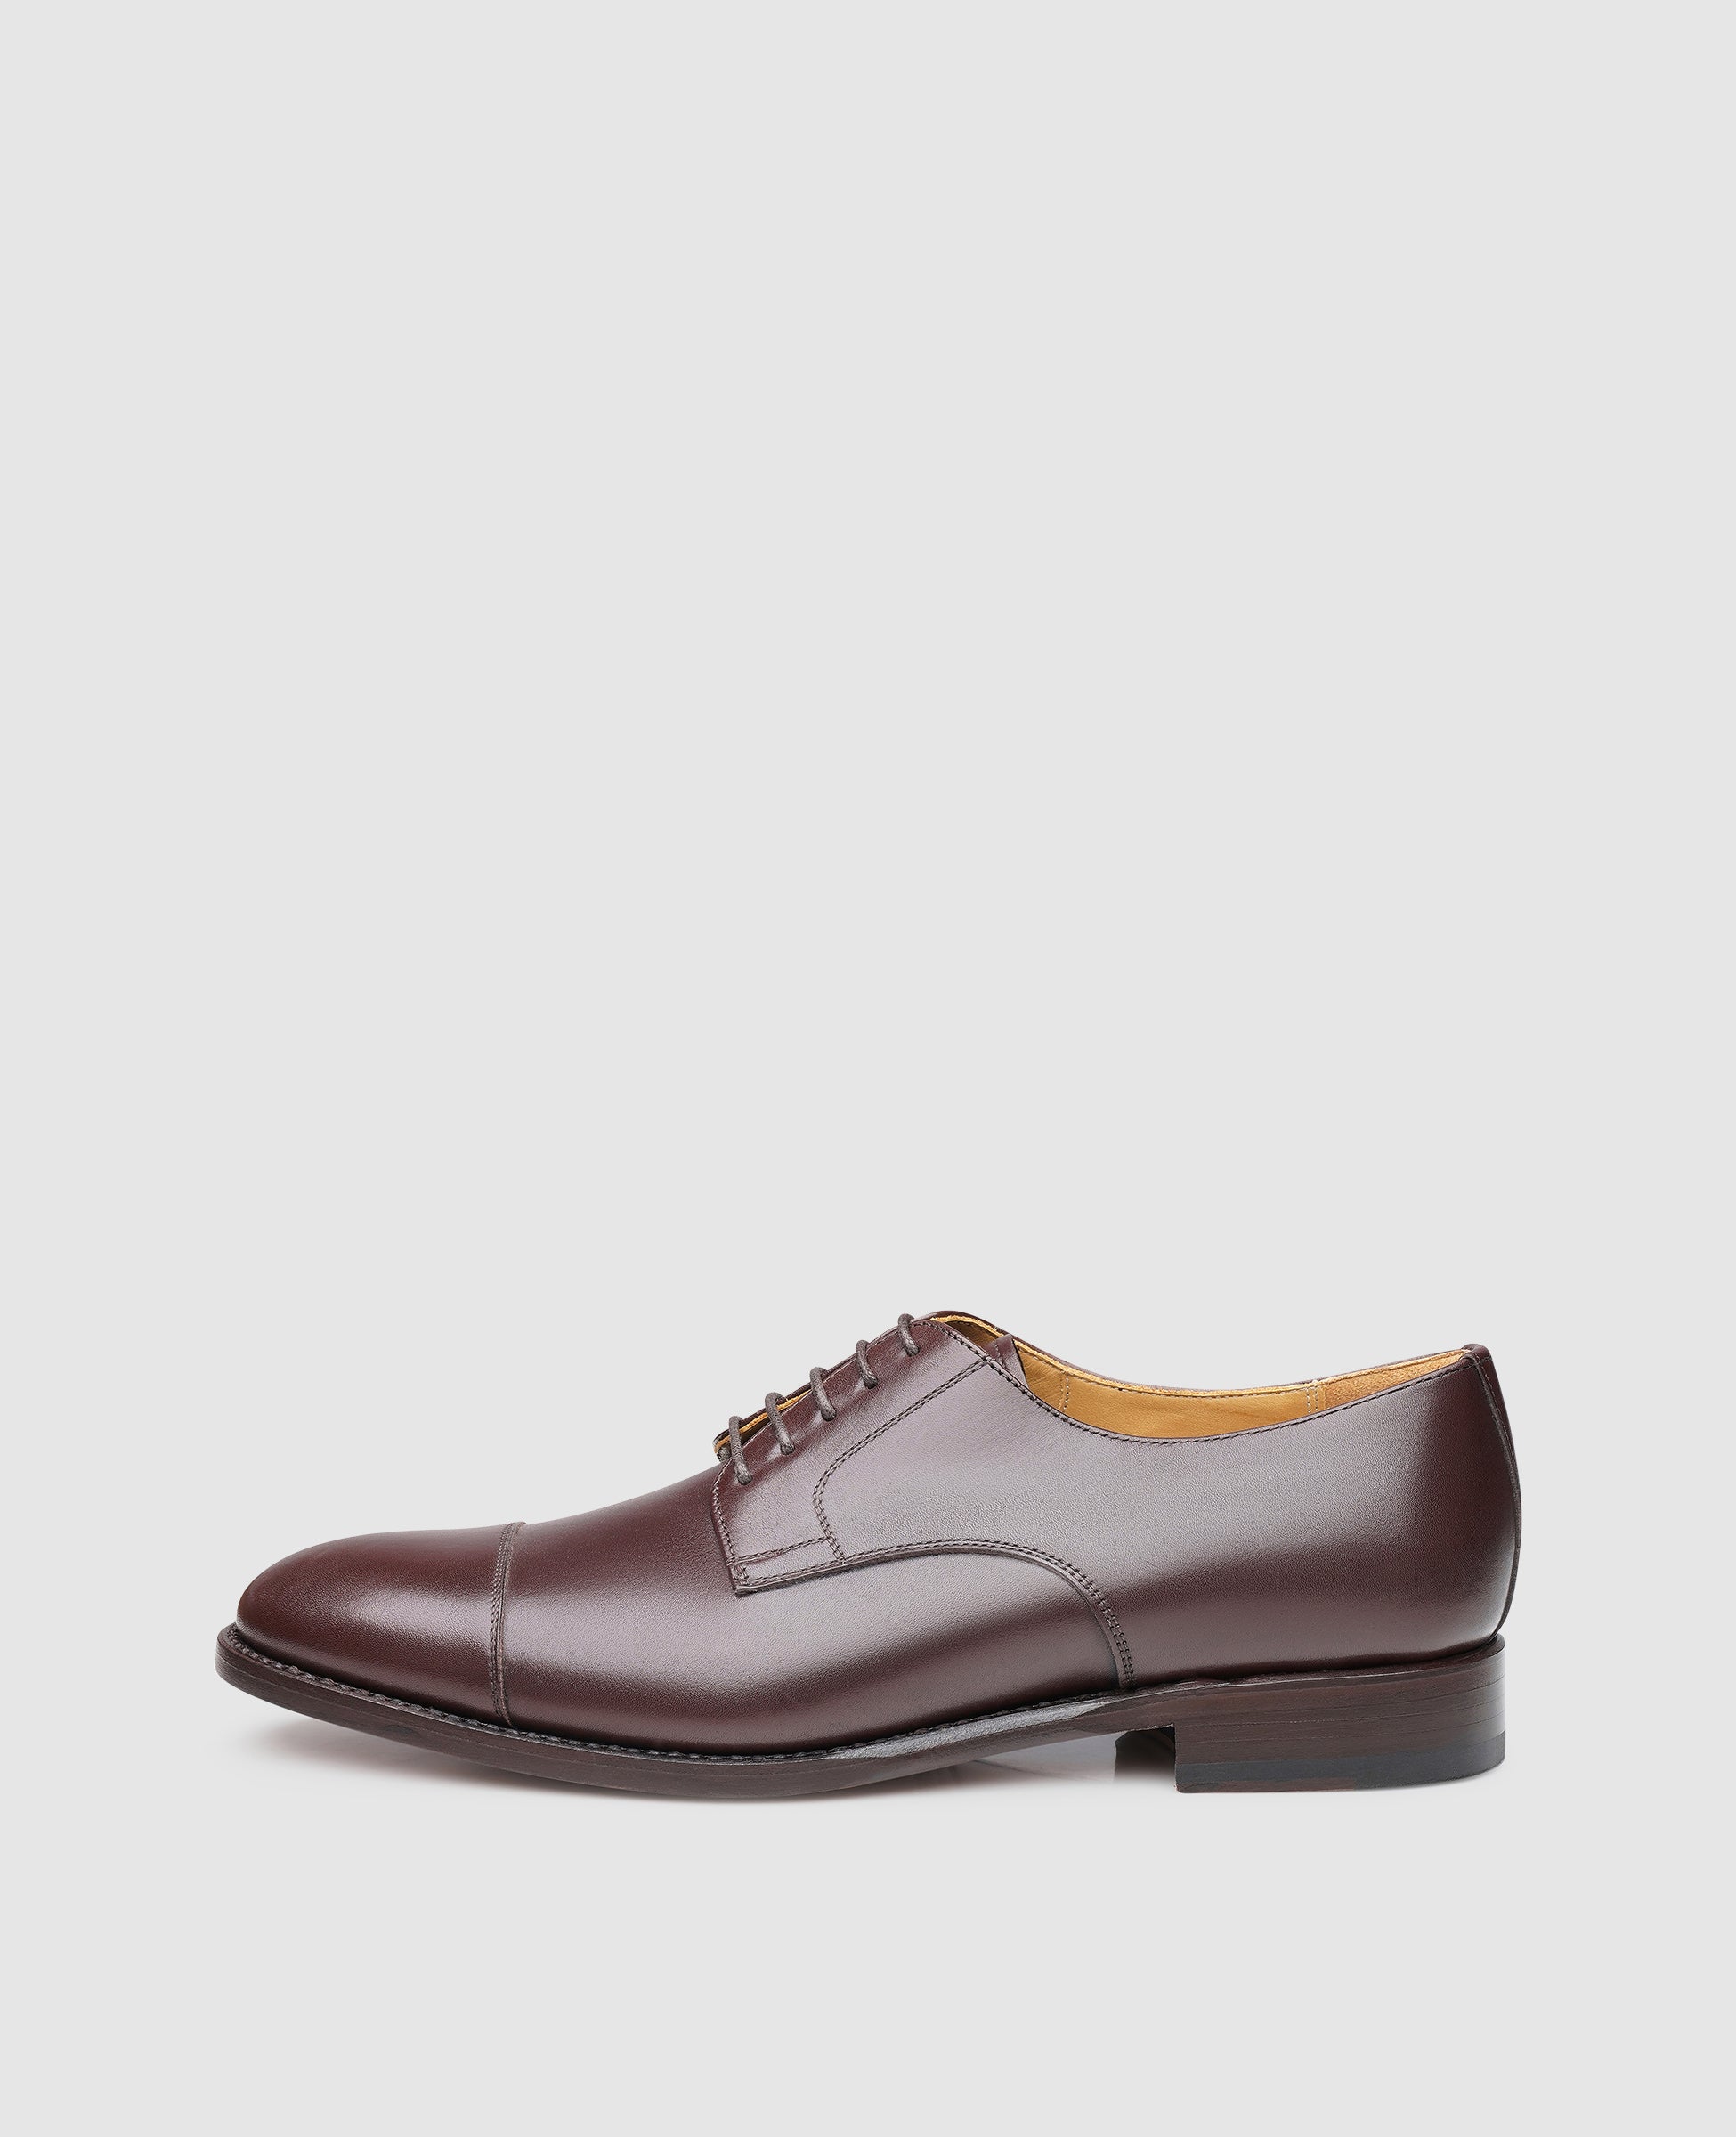 SHOEPASSION.com – Goodyear-welted Cap-Toe Derby in dark brown | Shoepassion